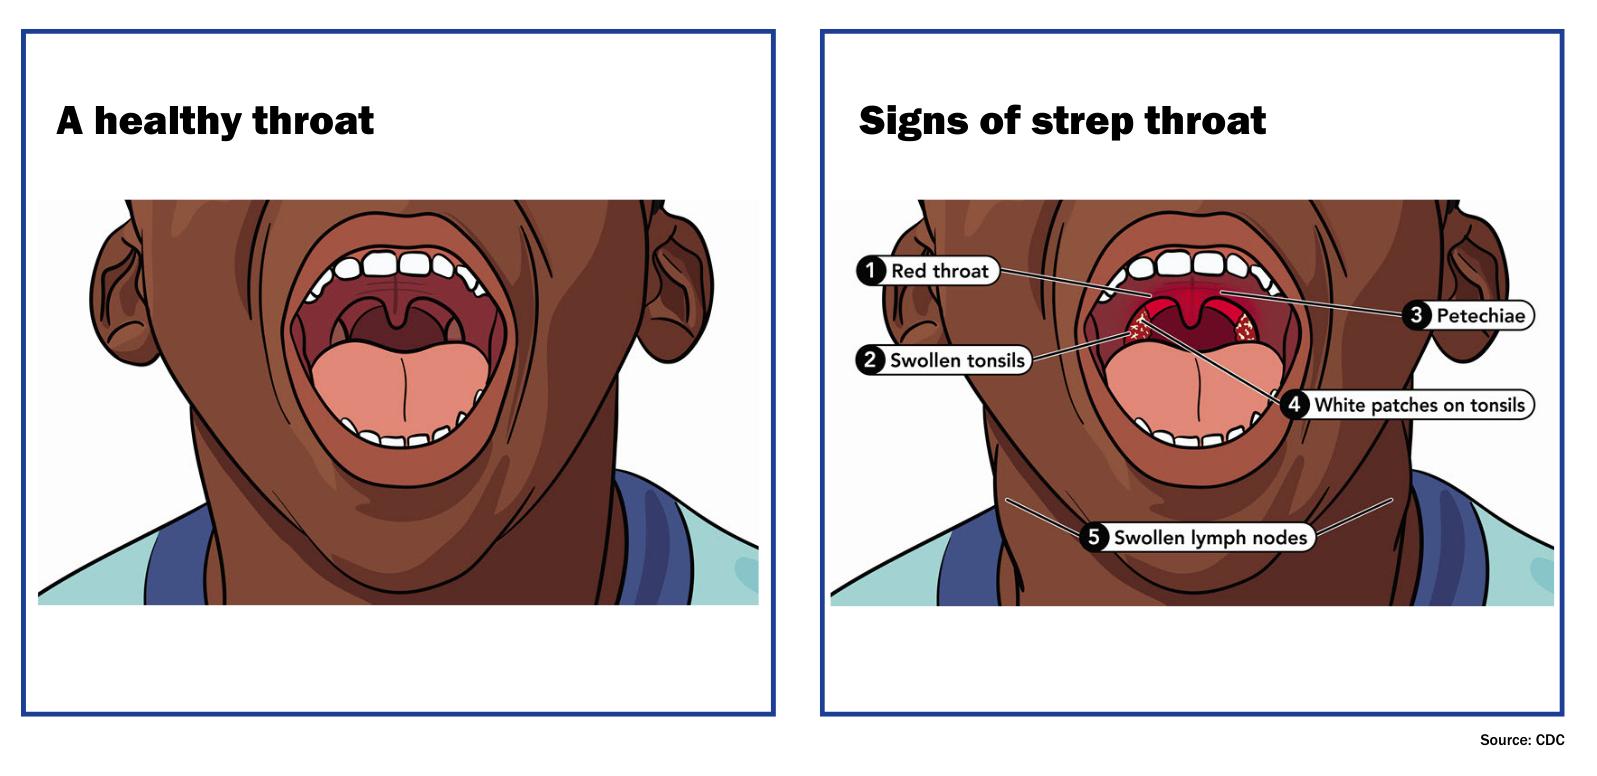 Diagram of a healthy throat compared to a throat with signs of strep throat: 1. red throat, 2 swollen tonsils, 3. petechiae, 4. white patched on tonsils 5. swollen lymph nodes.